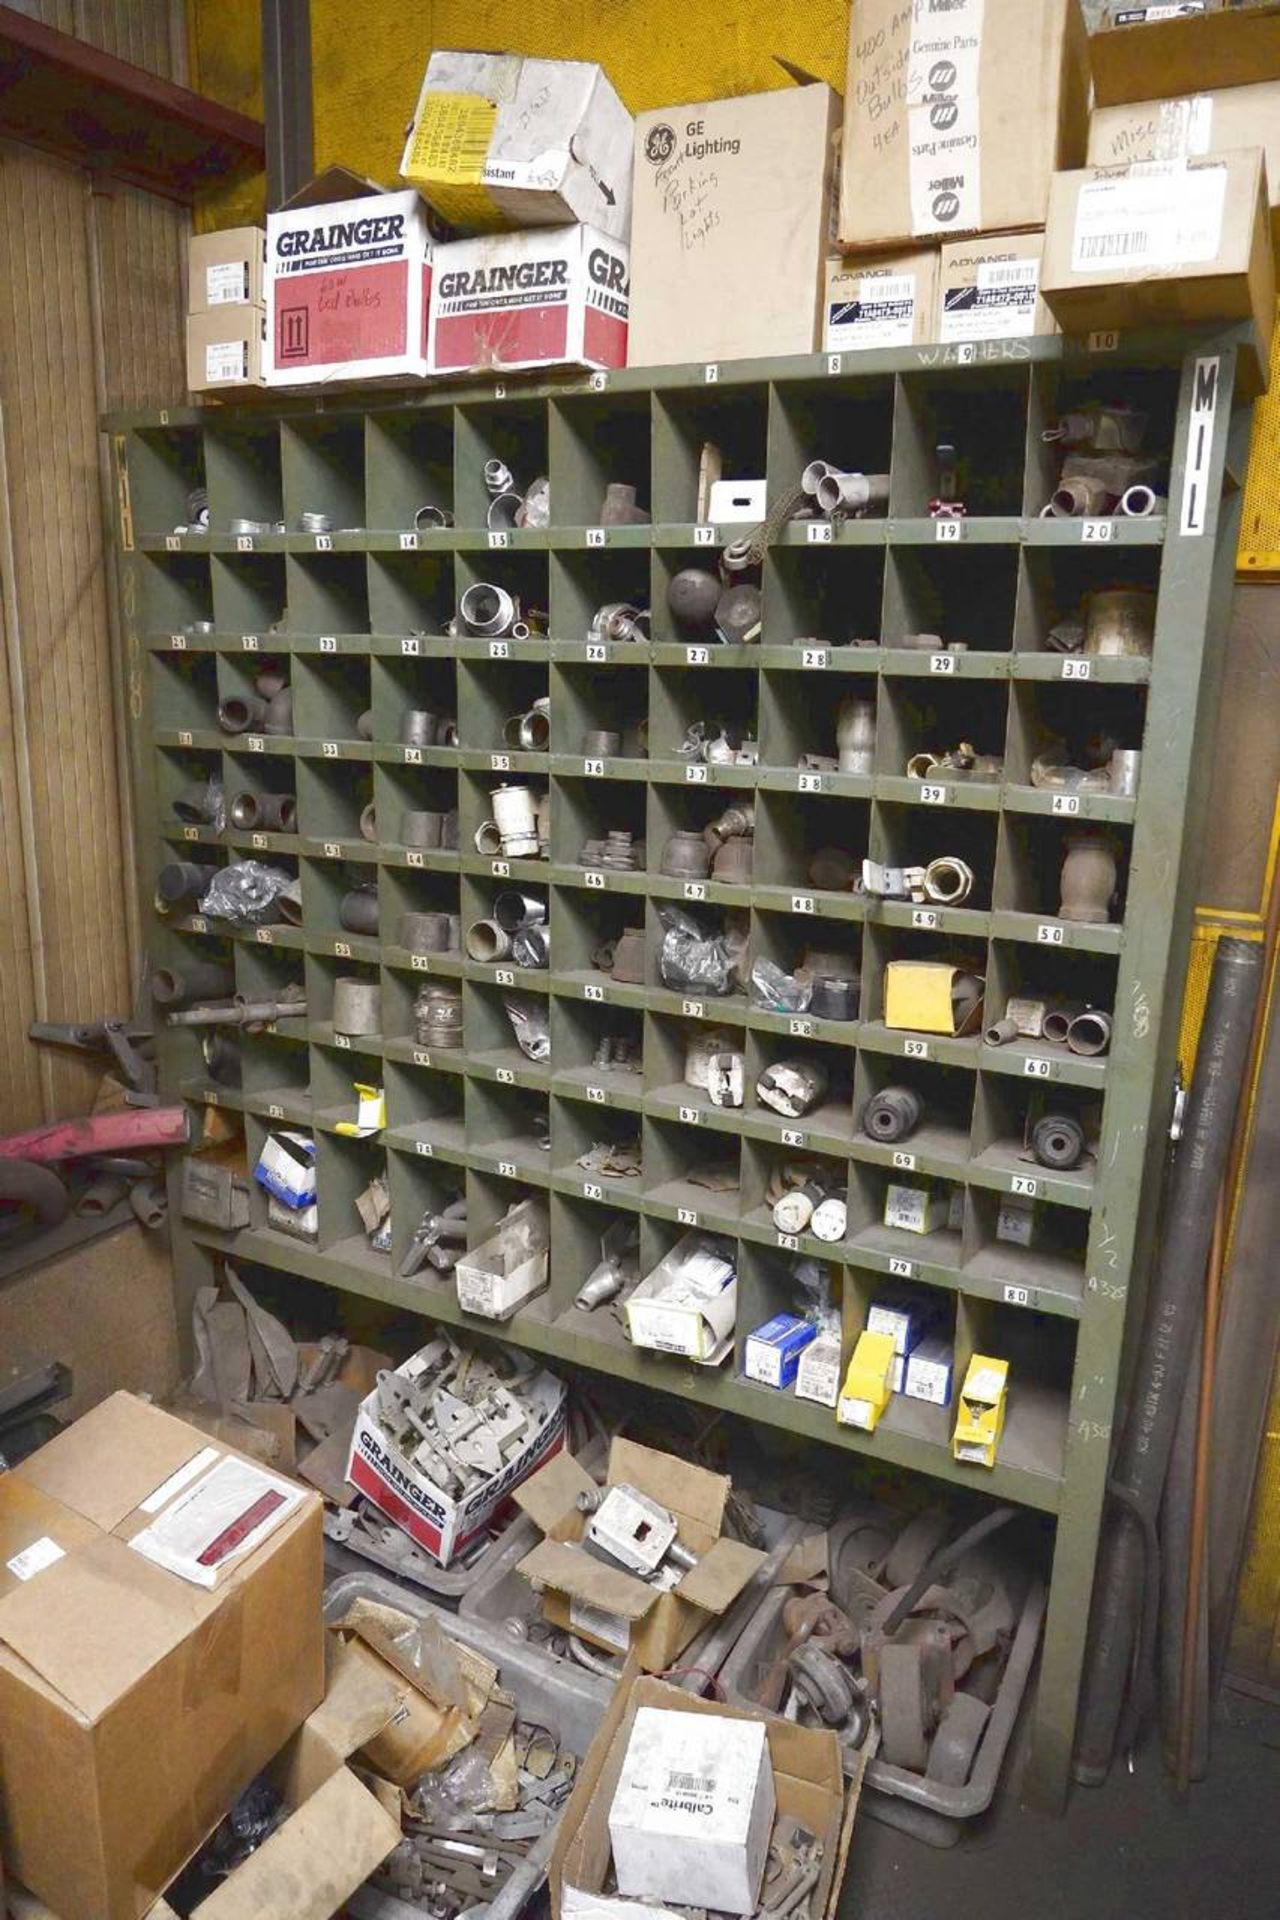 Contents of Compressor Room - Image 15 of 16